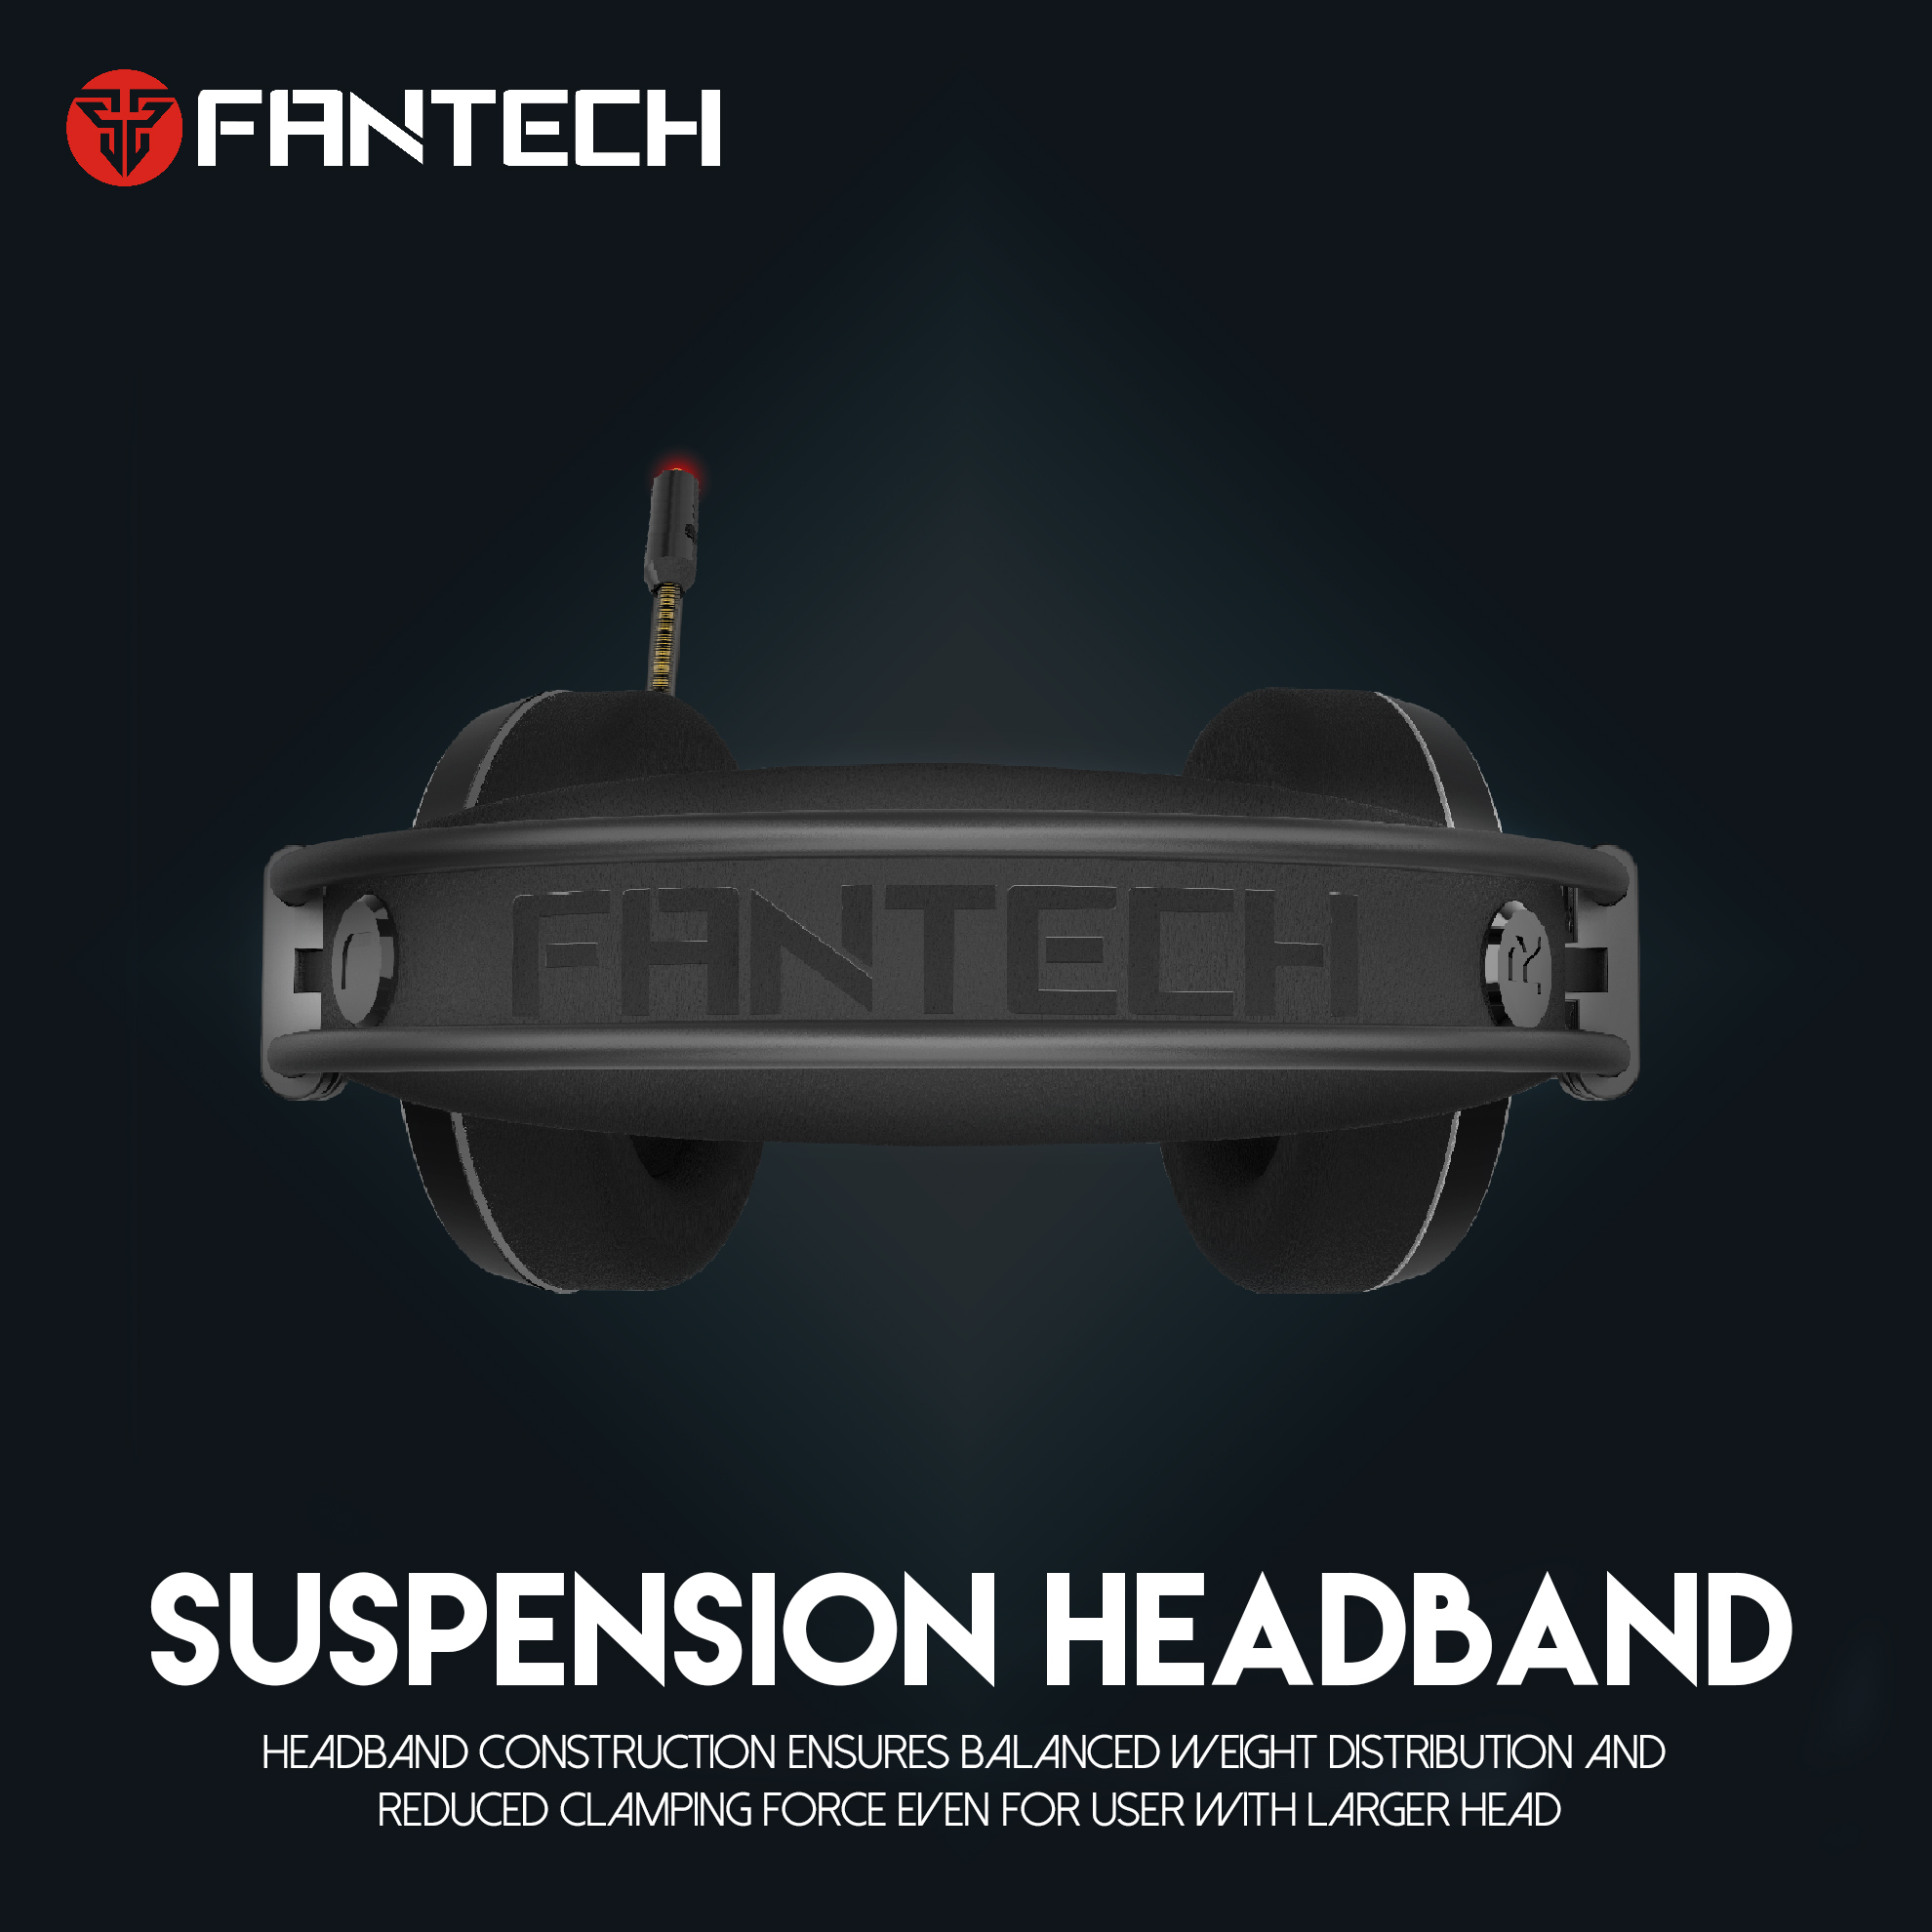 FANTECH HG23 Headphone Personalize With Octane 7.1 RGB USB Just Wired Gaming Headset Alloy Earmuffs For PC PS4 Gaming Headphones